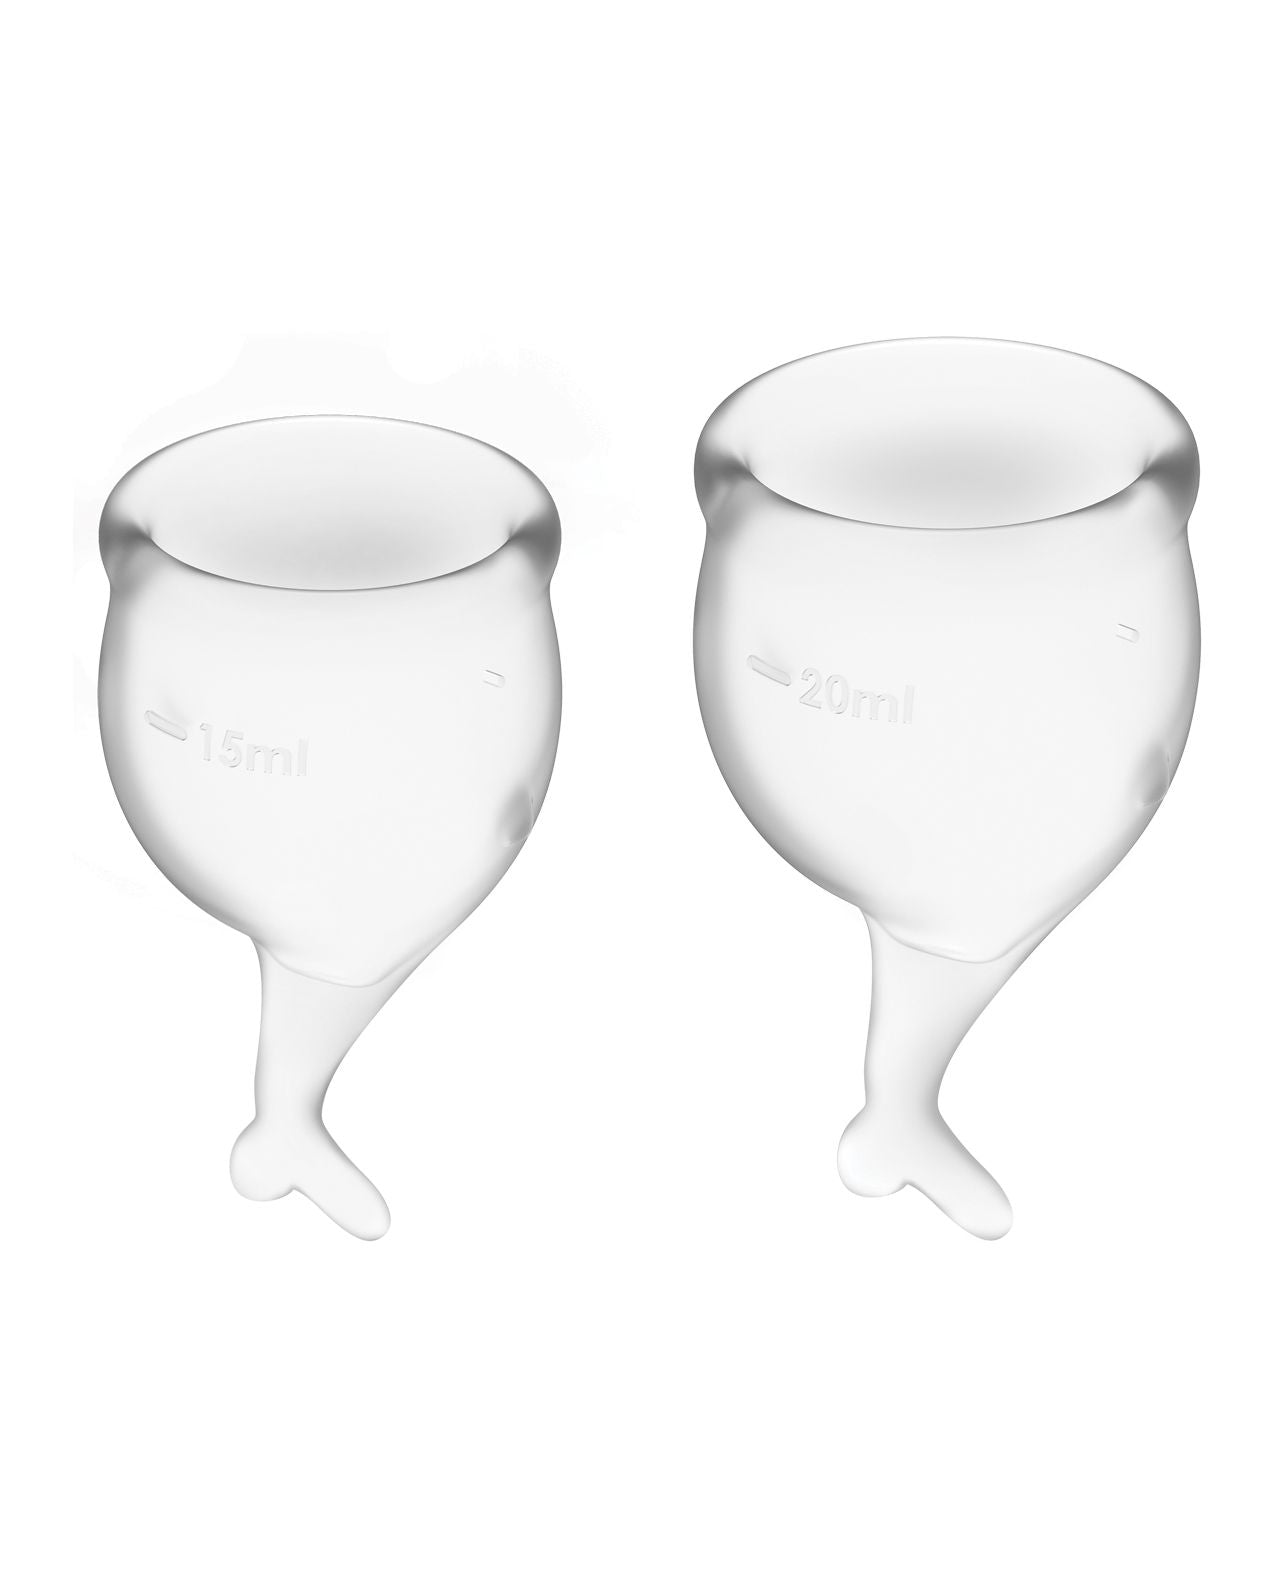 Image shows the 2 different size cups that come with the set (clear).